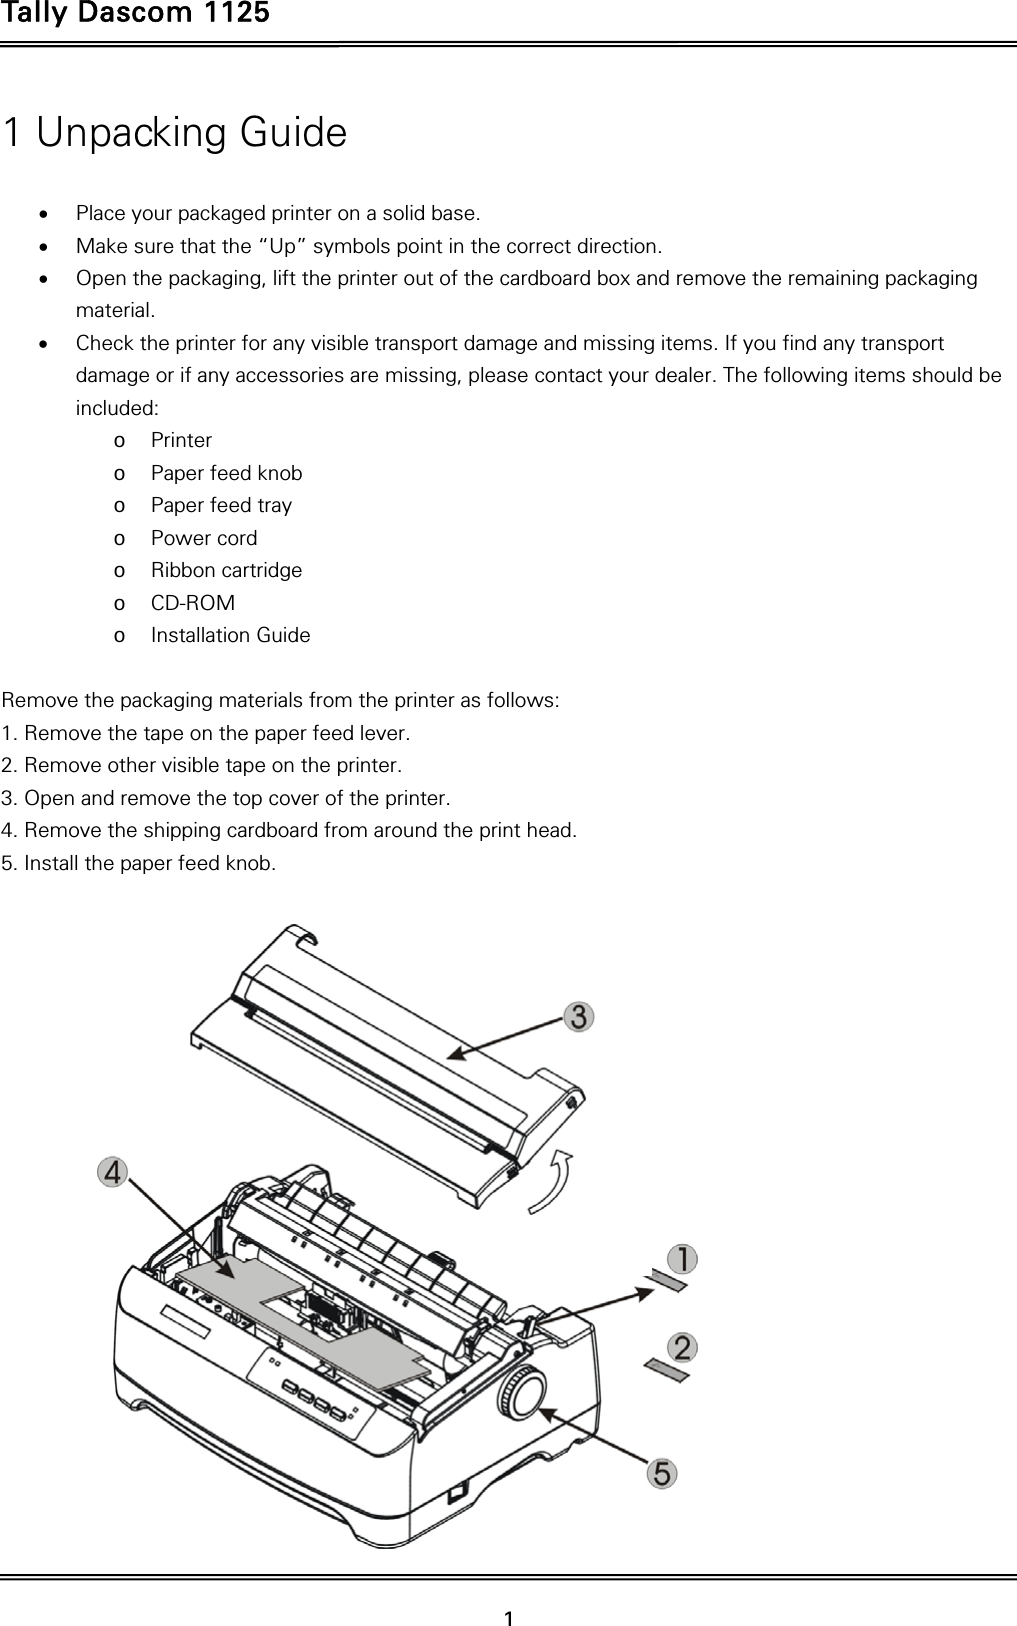 Tally Dascom 1125   1  1 Unpacking Guide   Place your packaged printer on a solid base.  Make sure that the “Up” symbols point in the correct direction.  Open the packaging, lift the printer out of the cardboard box and remove the remaining packaging material.  Check the printer for any visible transport damage and missing items. If you find any transport damage or if any accessories are missing, please contact your dealer. The following items should be included: o Printer o Paper feed knob o Paper feed tray o Power cord o Ribbon cartridge o CD-ROM o Installation Guide  Remove the packaging materials from the printer as follows: 1. Remove the tape on the paper feed lever. 2. Remove other visible tape on the printer. 3. Open and remove the top cover of the printer. 4. Remove the shipping cardboard from around the print head. 5. Install the paper feed knob.    